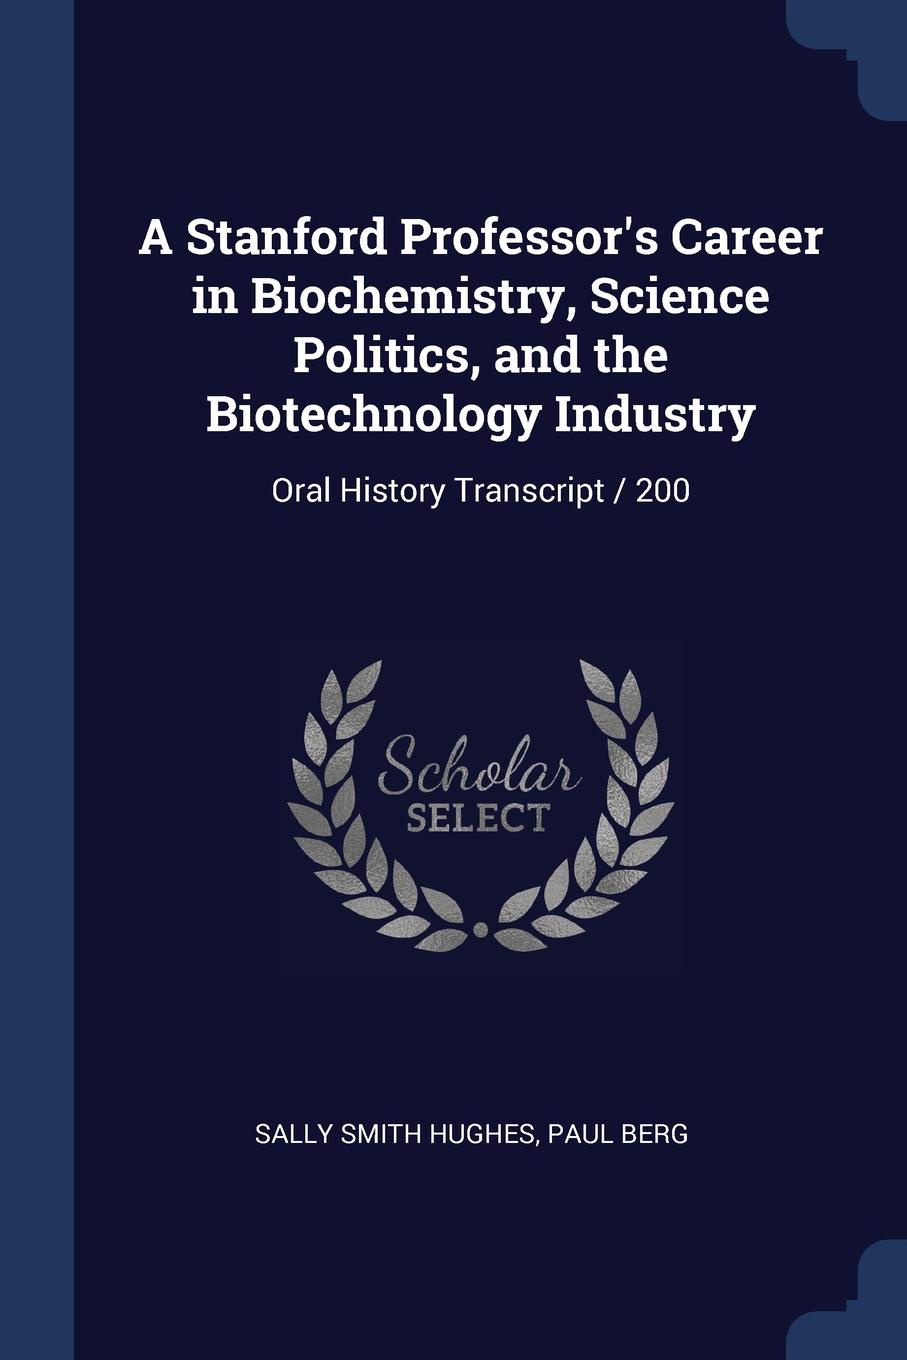 A Stanford Professor.s Career in Biochemistry, Science Politics, and the Biotechnology Industry. Oral History Transcript / 200